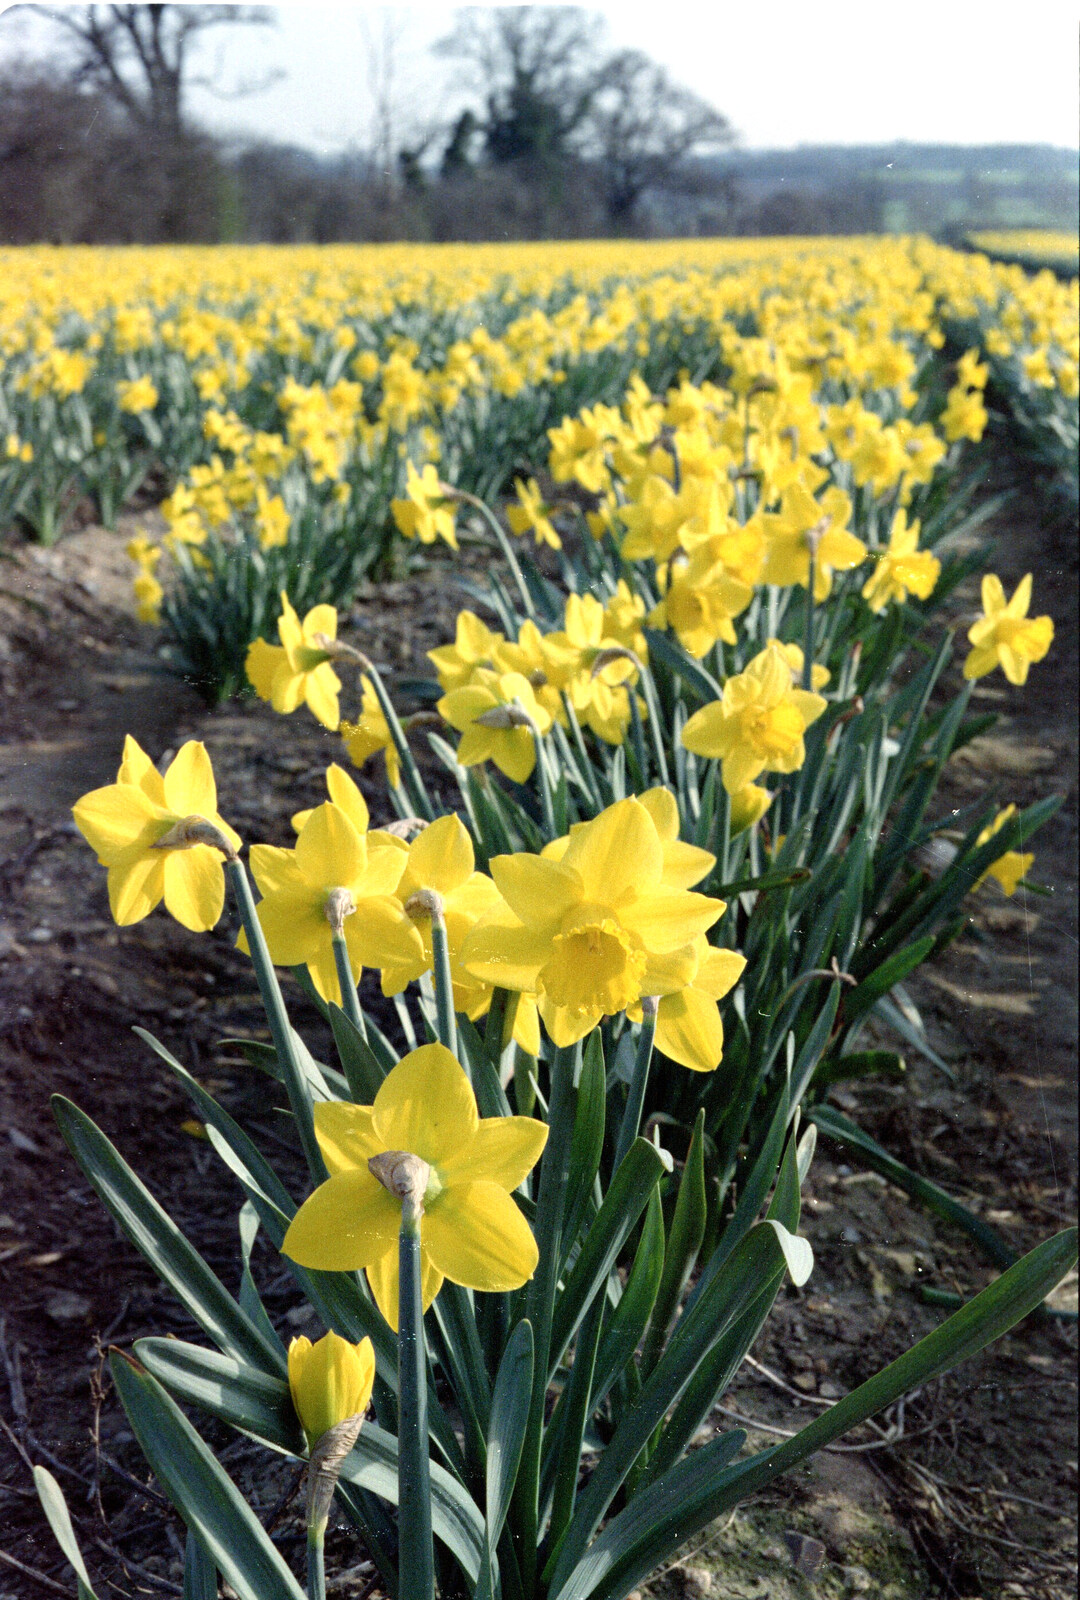 Bright yellow daffs from Pedros and Daffodils, Norwich and Billingford, Norfolk - 20th April 1991